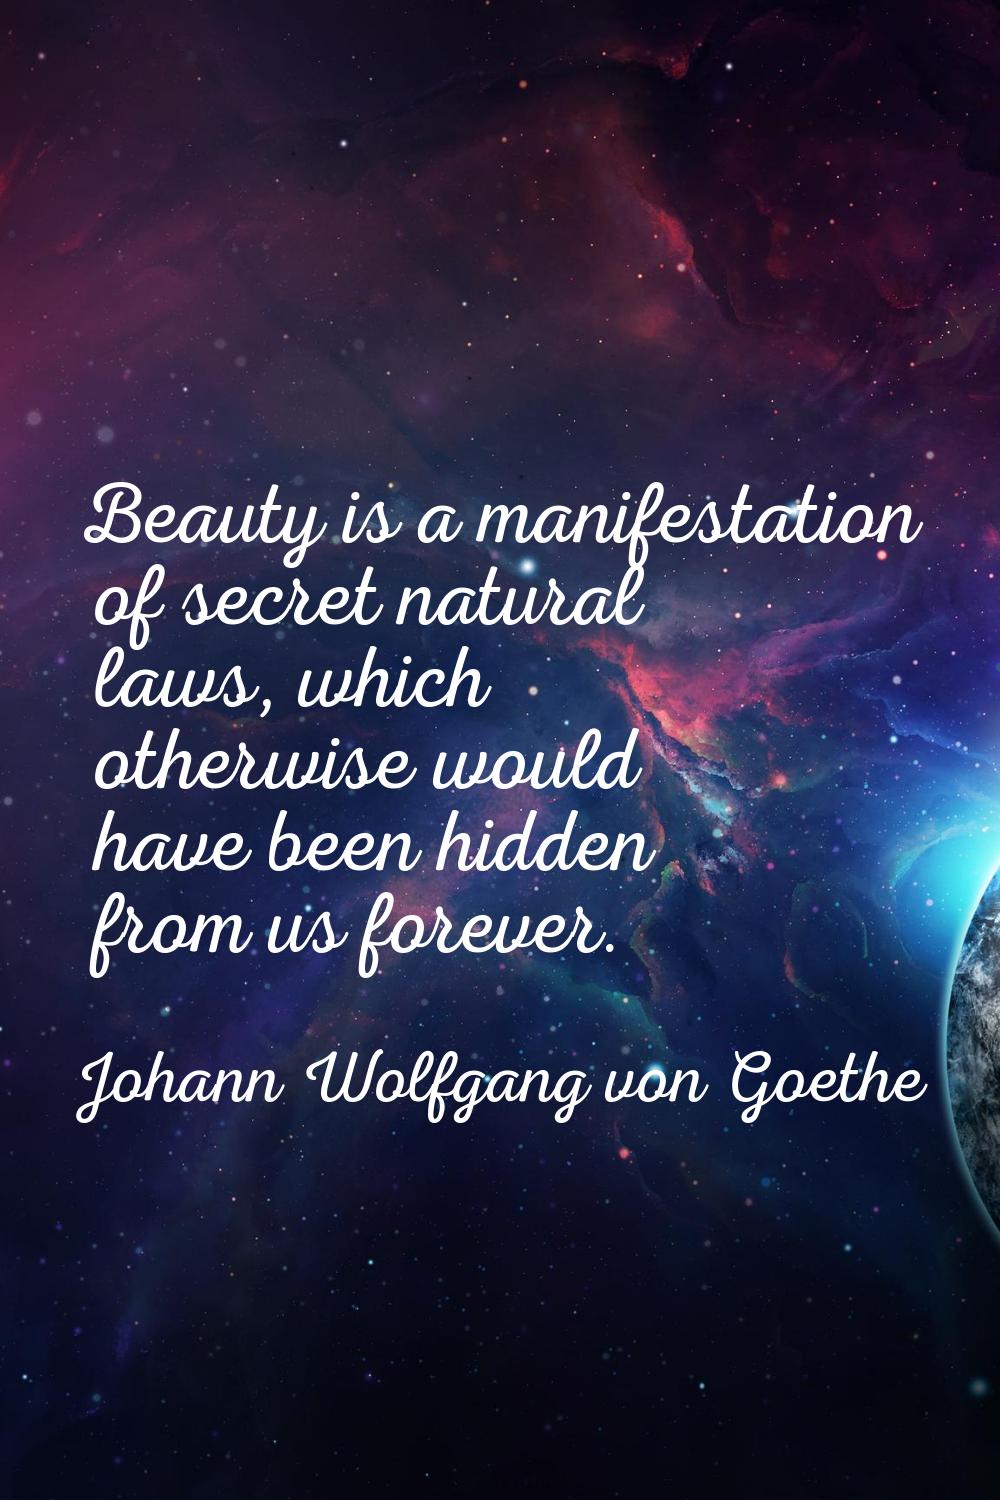 Beauty is a manifestation of secret natural laws, which otherwise would have been hidden from us fo